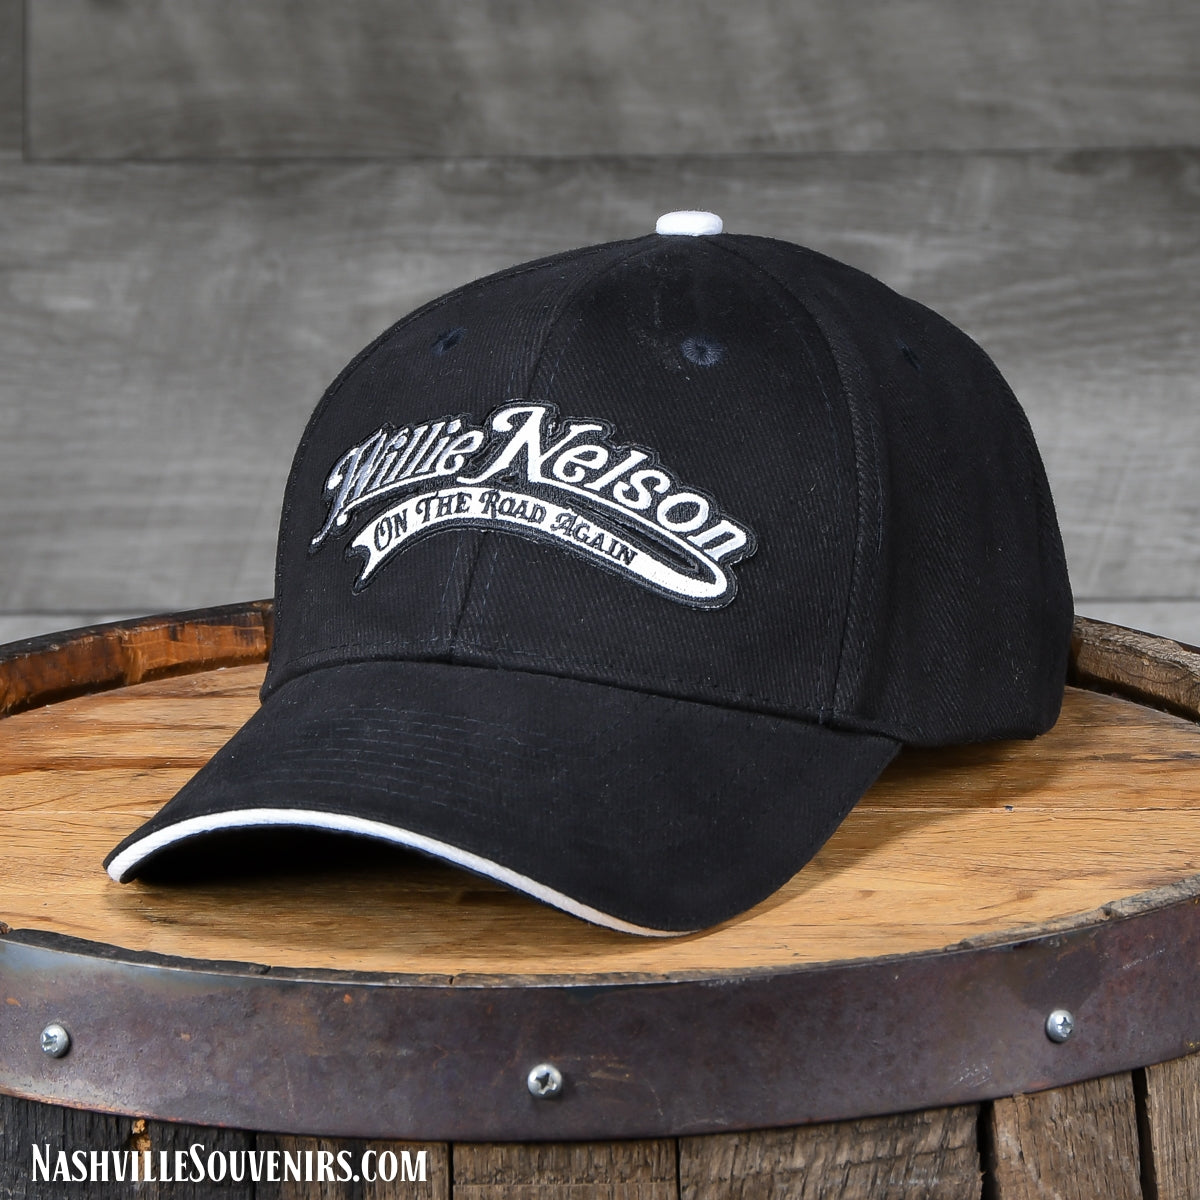 "On the Road Again" Willie Nelson Cap